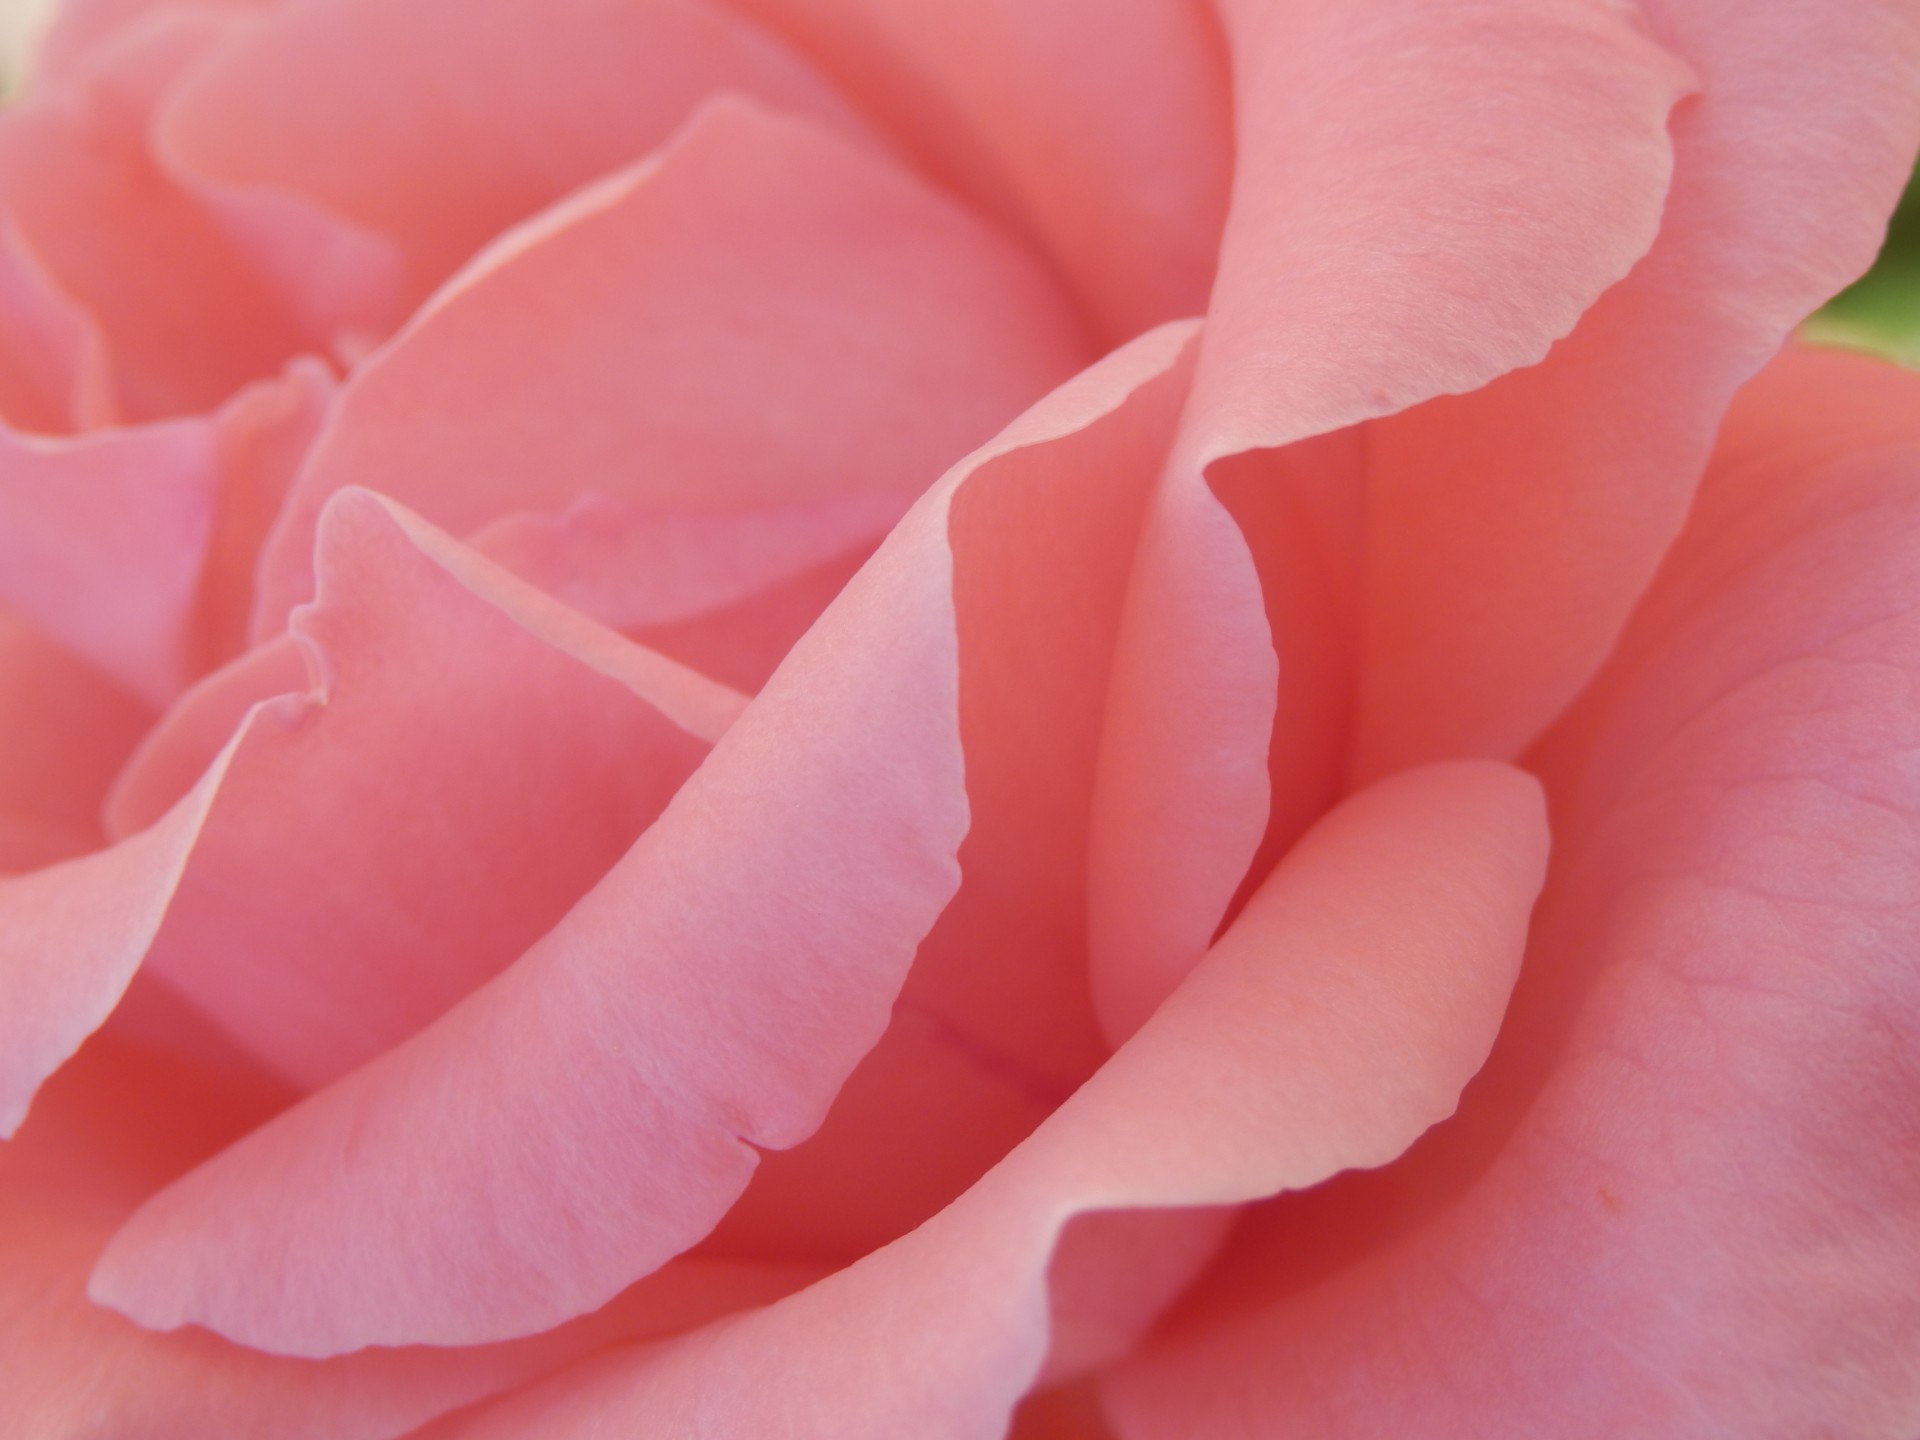 pink rose with petals in close up view